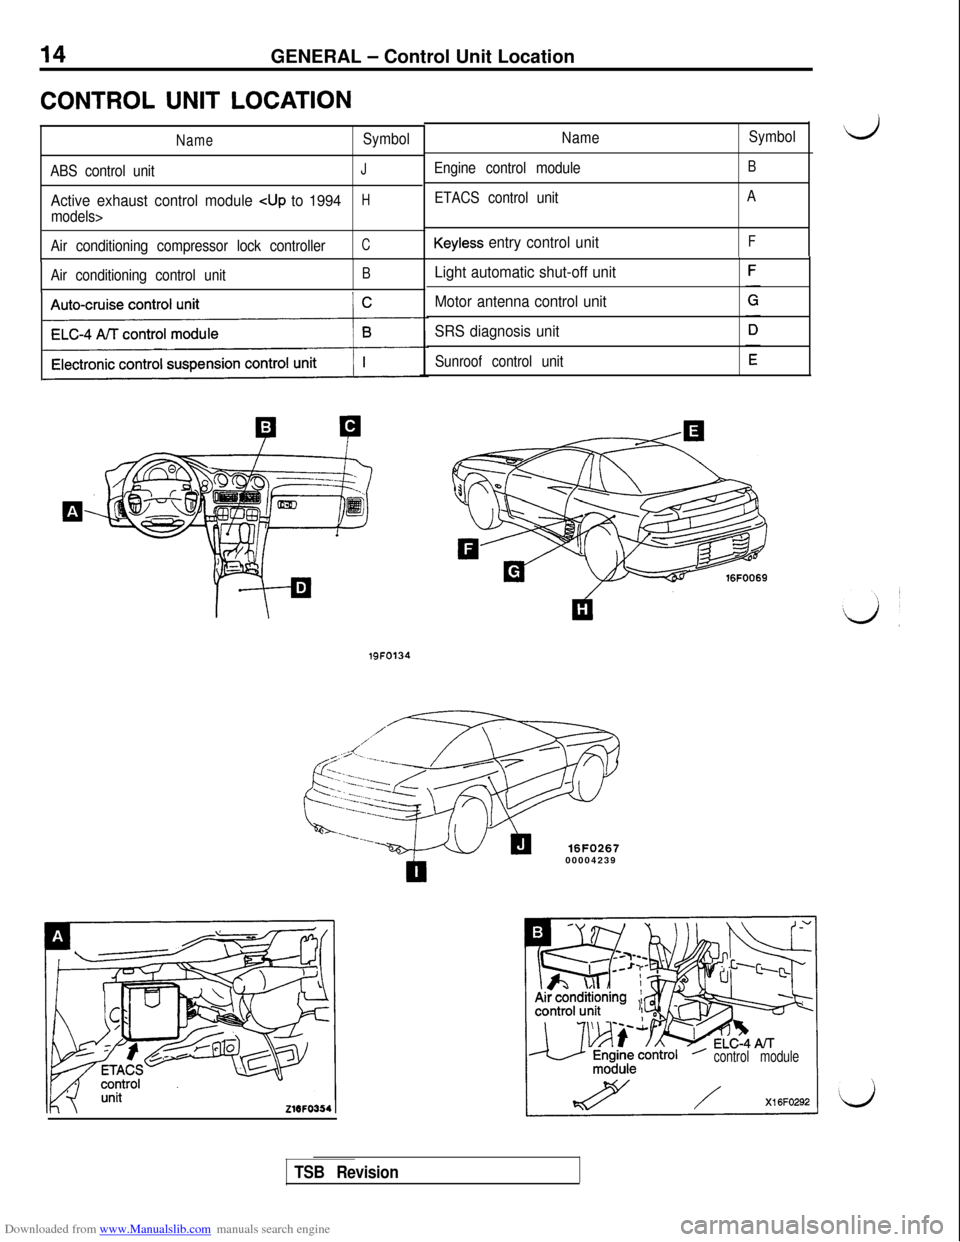 MITSUBISHI 3000GT 1995 2.G User Guide Downloaded from www.Manualslib.com manuals search engine 14GENERAL - Control Unit Location
CONTROL UNIT LOCATION
NameSymbol
ABS control unit
J
Active exhaust control module cup to 1994H
models>
Air co